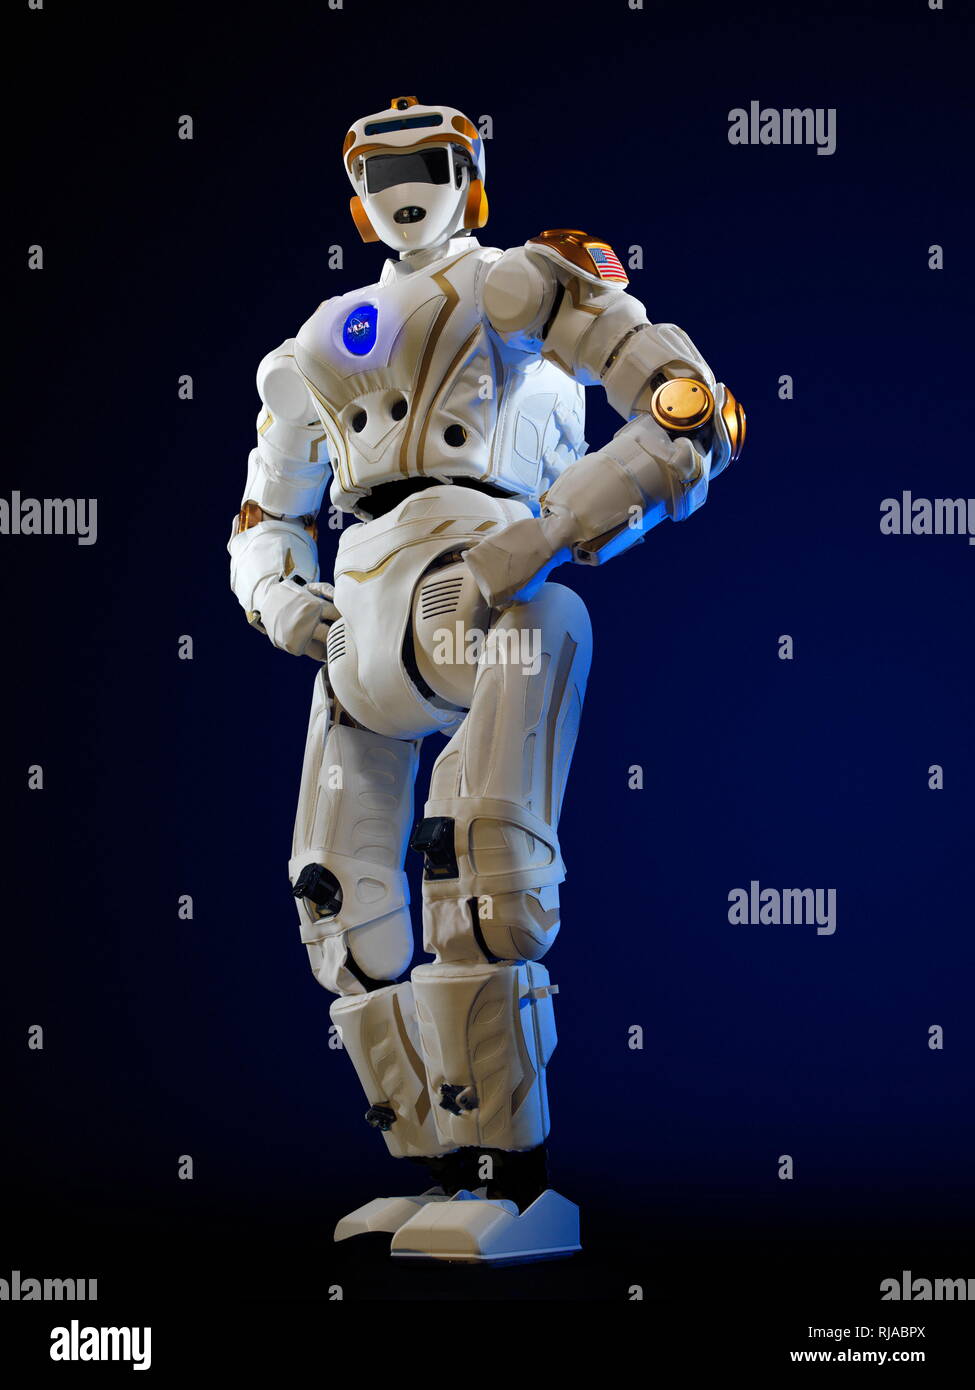 NASA R5, Valkyrie Robot, designed and built by the Johnson Space Center, Engineering Directorate in 2013. Valkyrie, a name taken from Norse mythology, is designed to be a robust, rugged, entirely electric humanoid robot capable of operating in degraded or damaged human-engineered environments Stock Photo